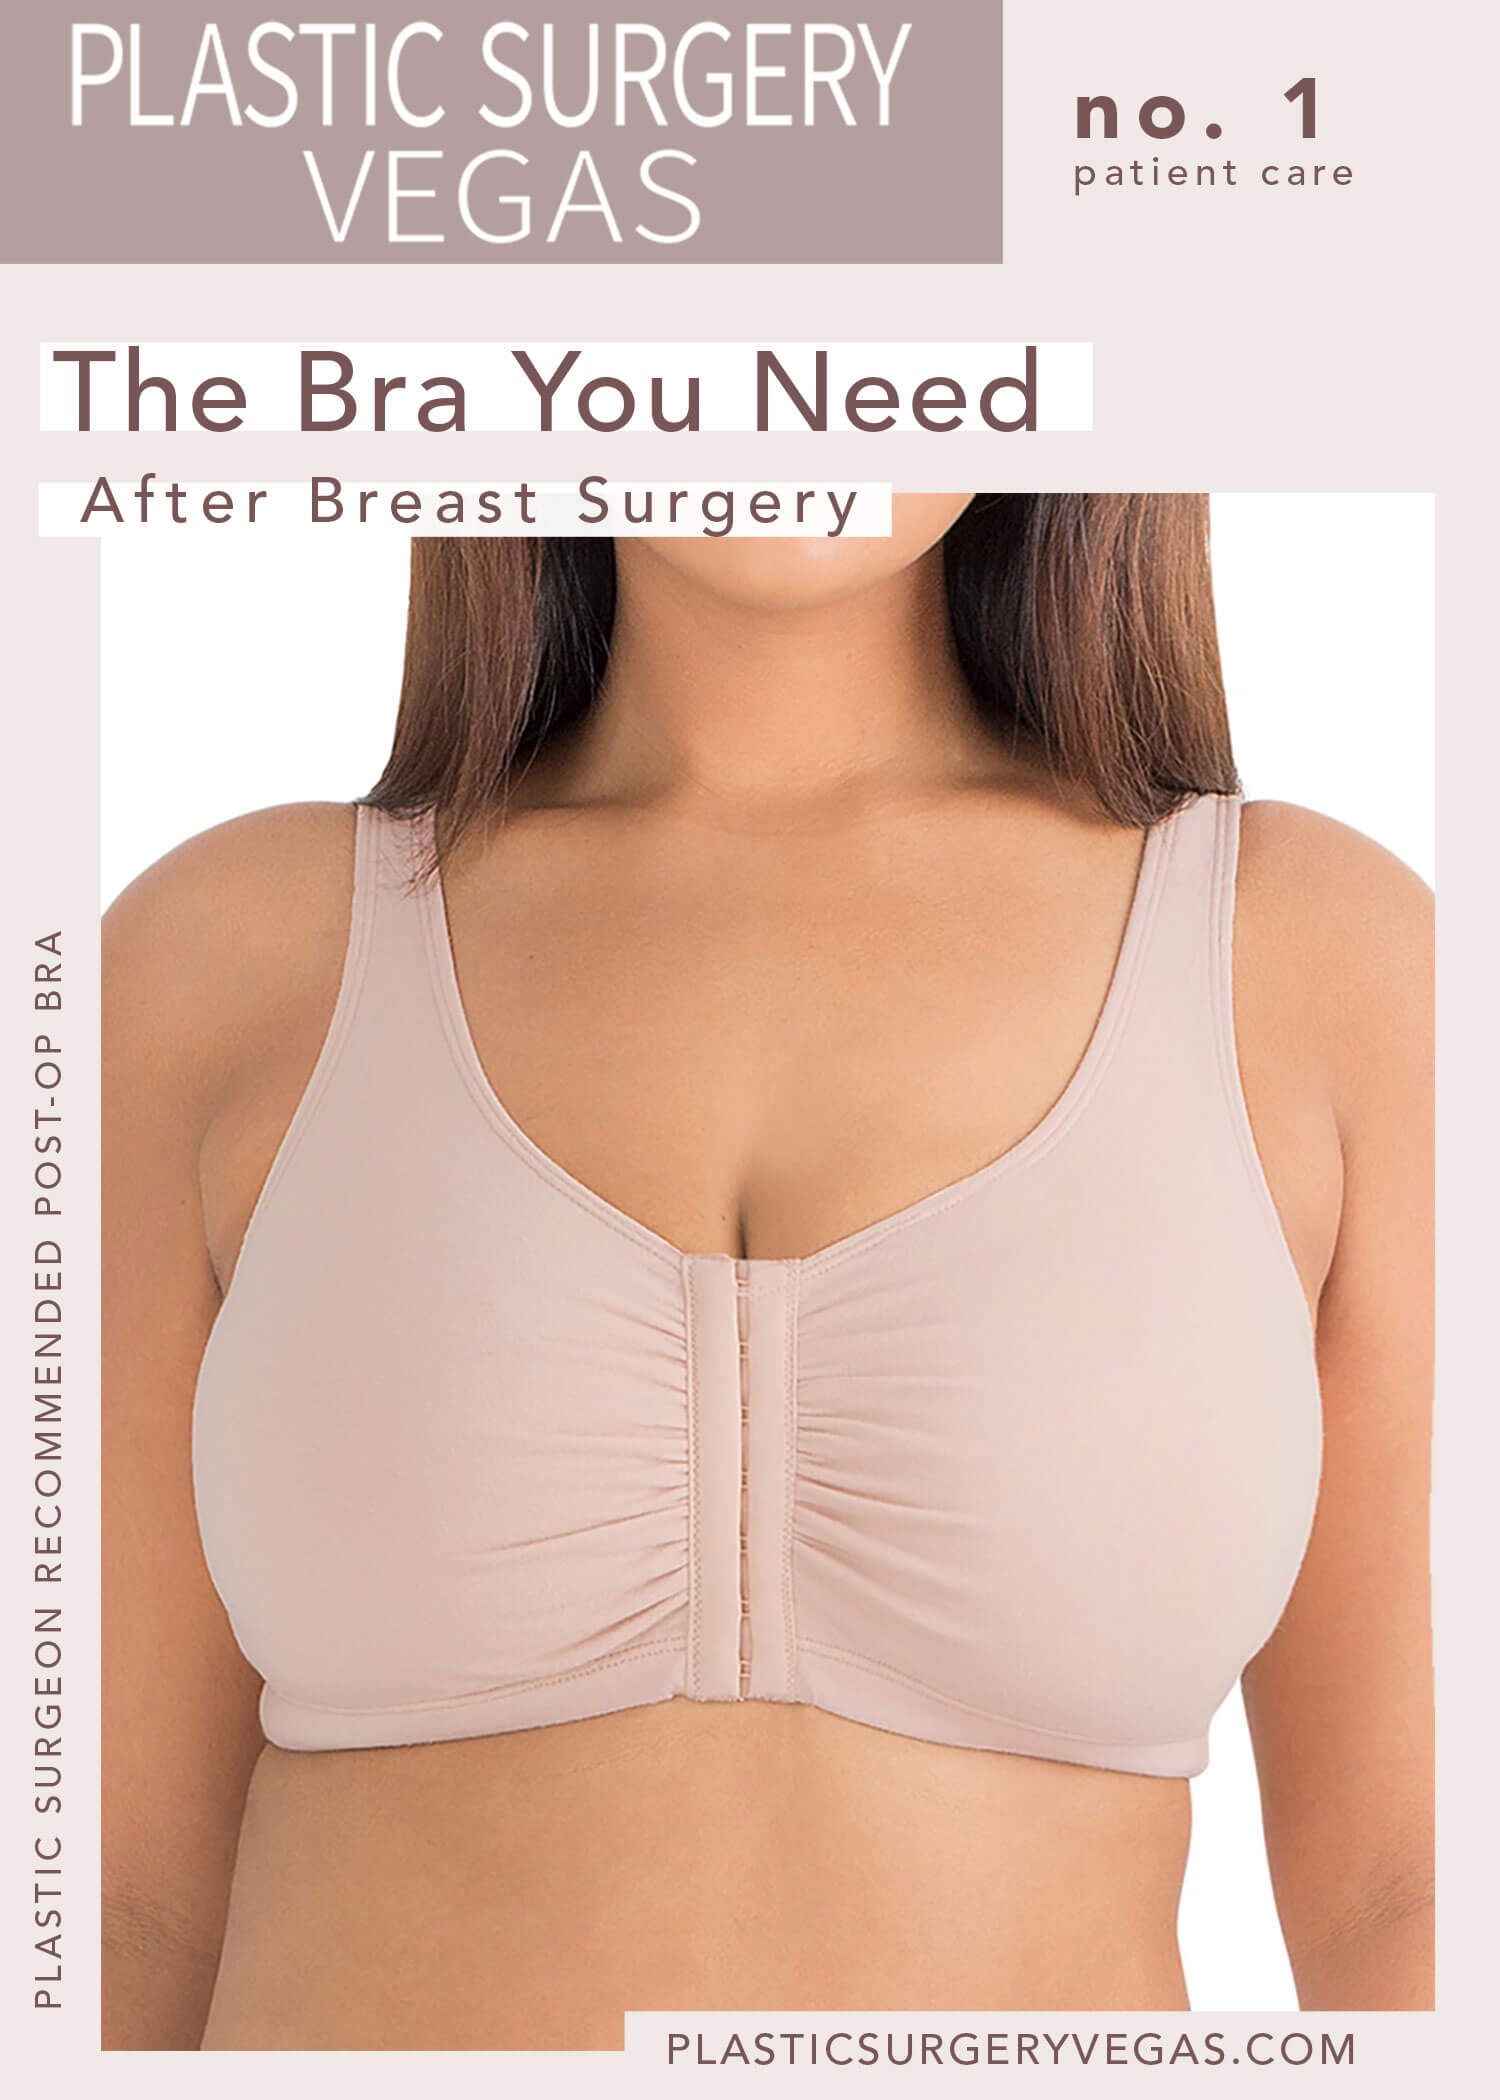 Breast Review After Surgery - BRAS - 💓 Breasts come in many